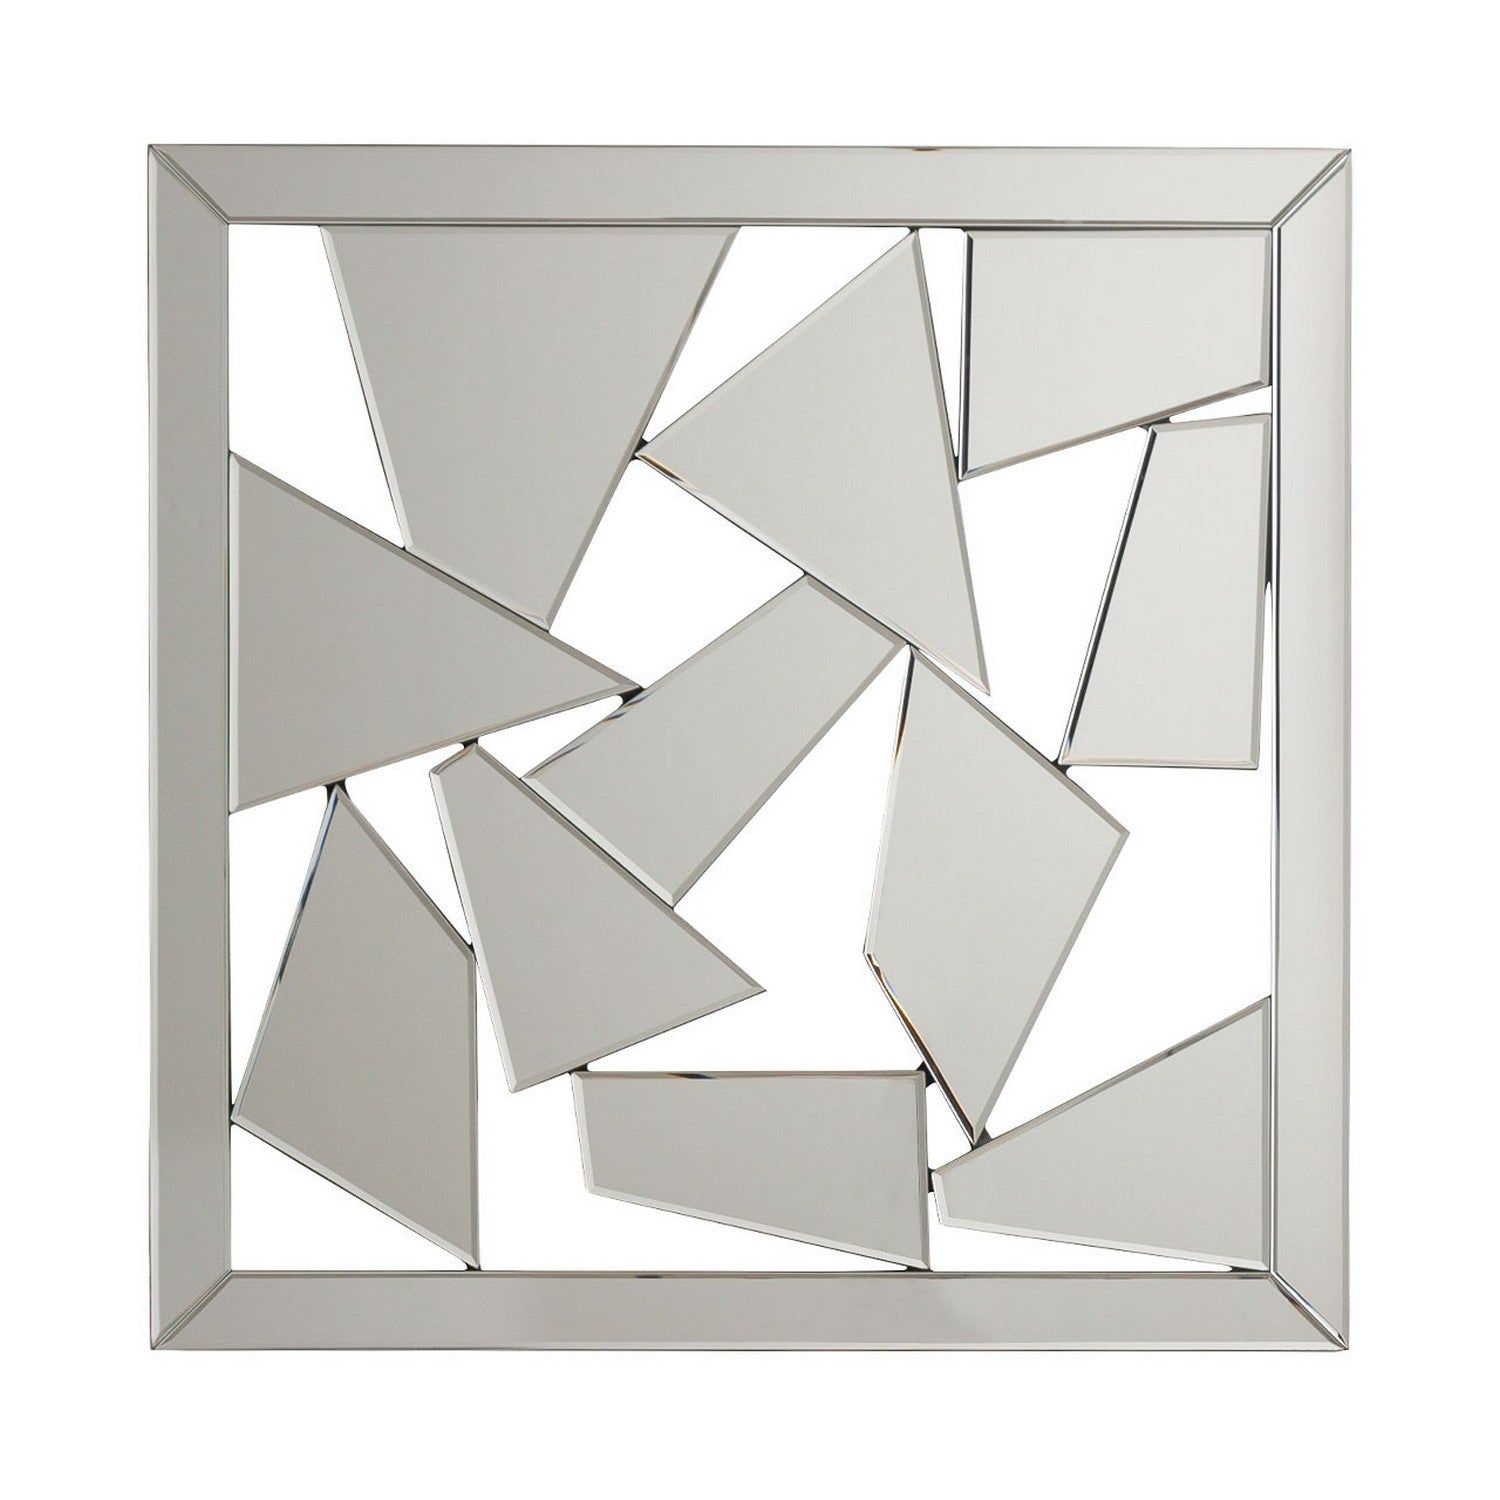 80cm Square Abstract Design Glass Mirror  Wall Art